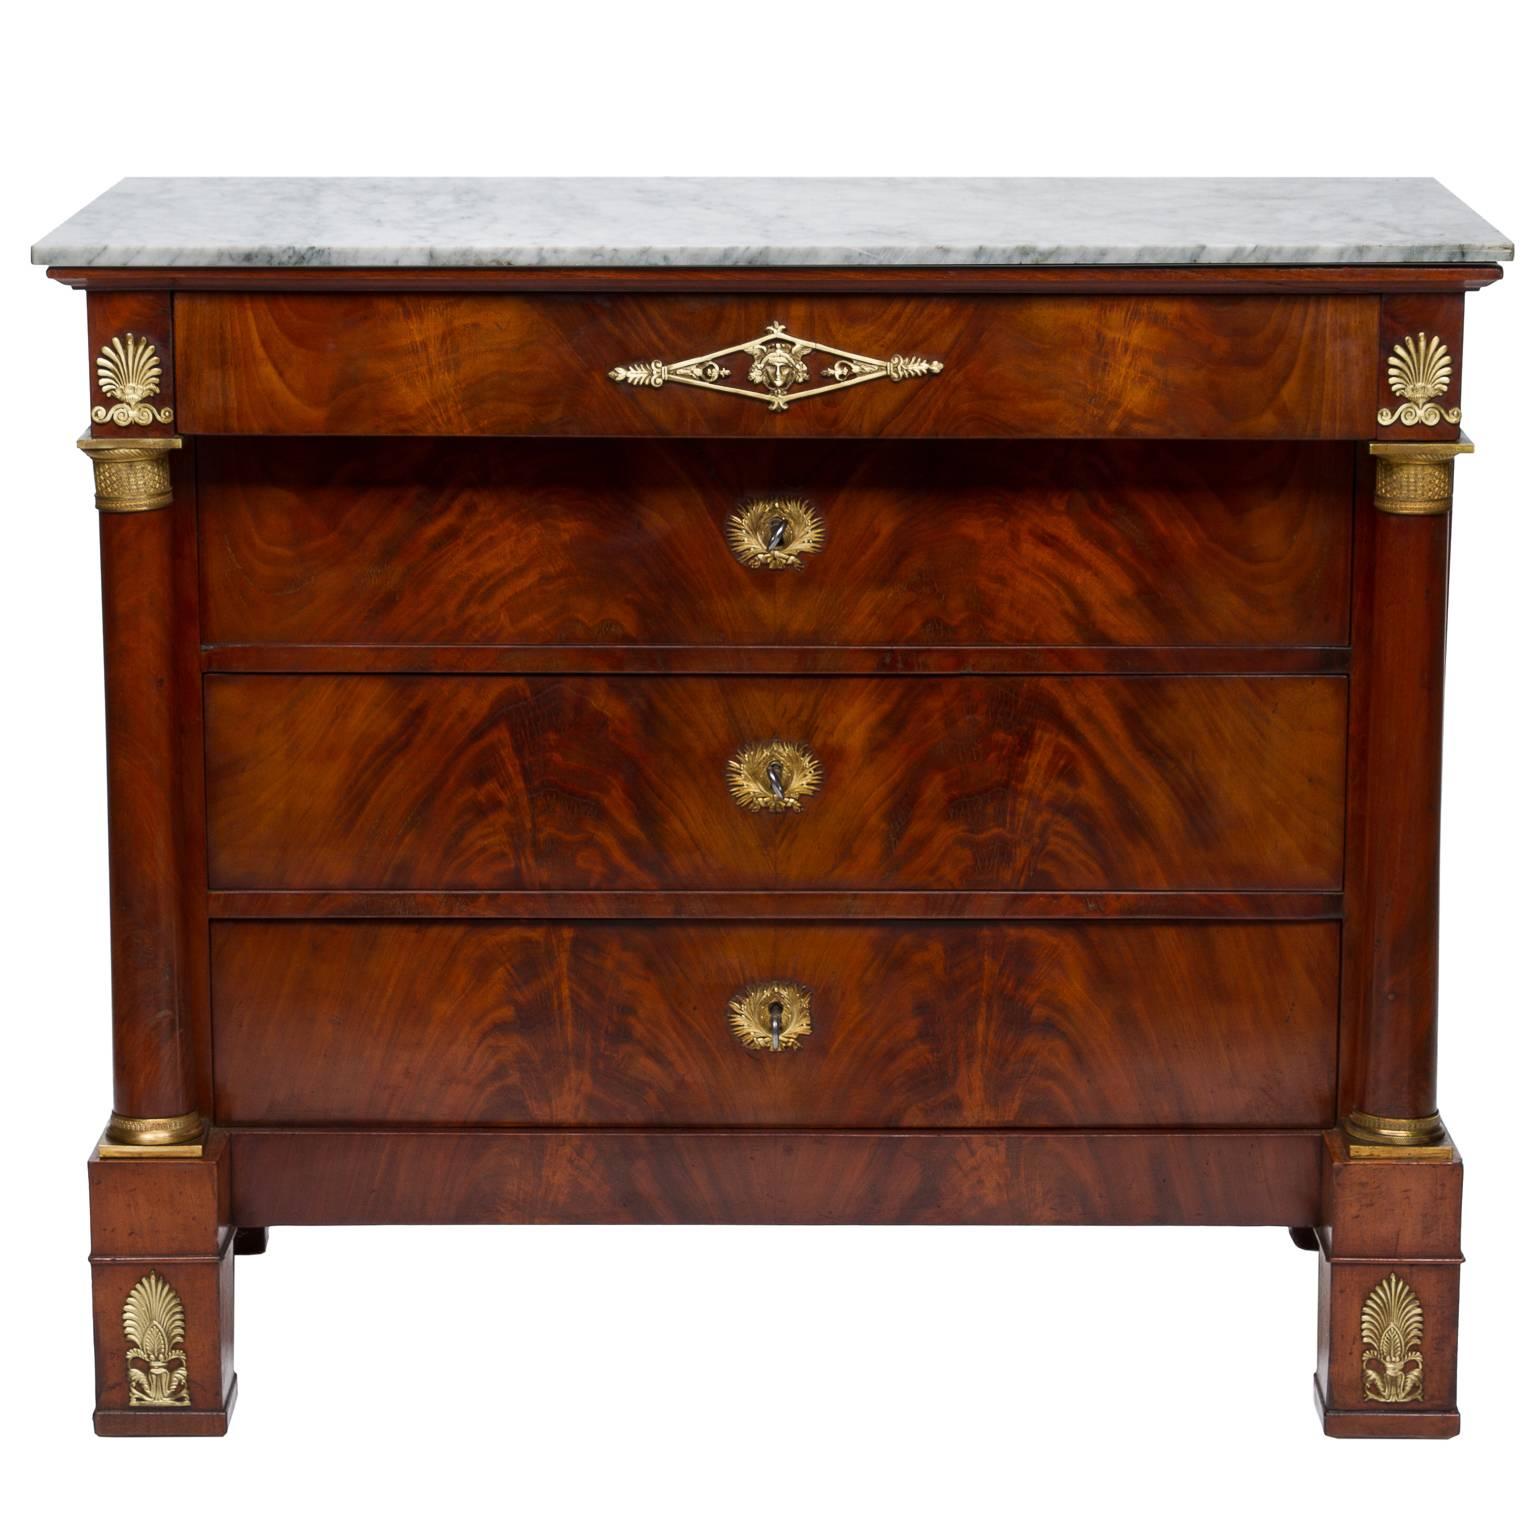 19th Century French Empire Marble-Top Commode